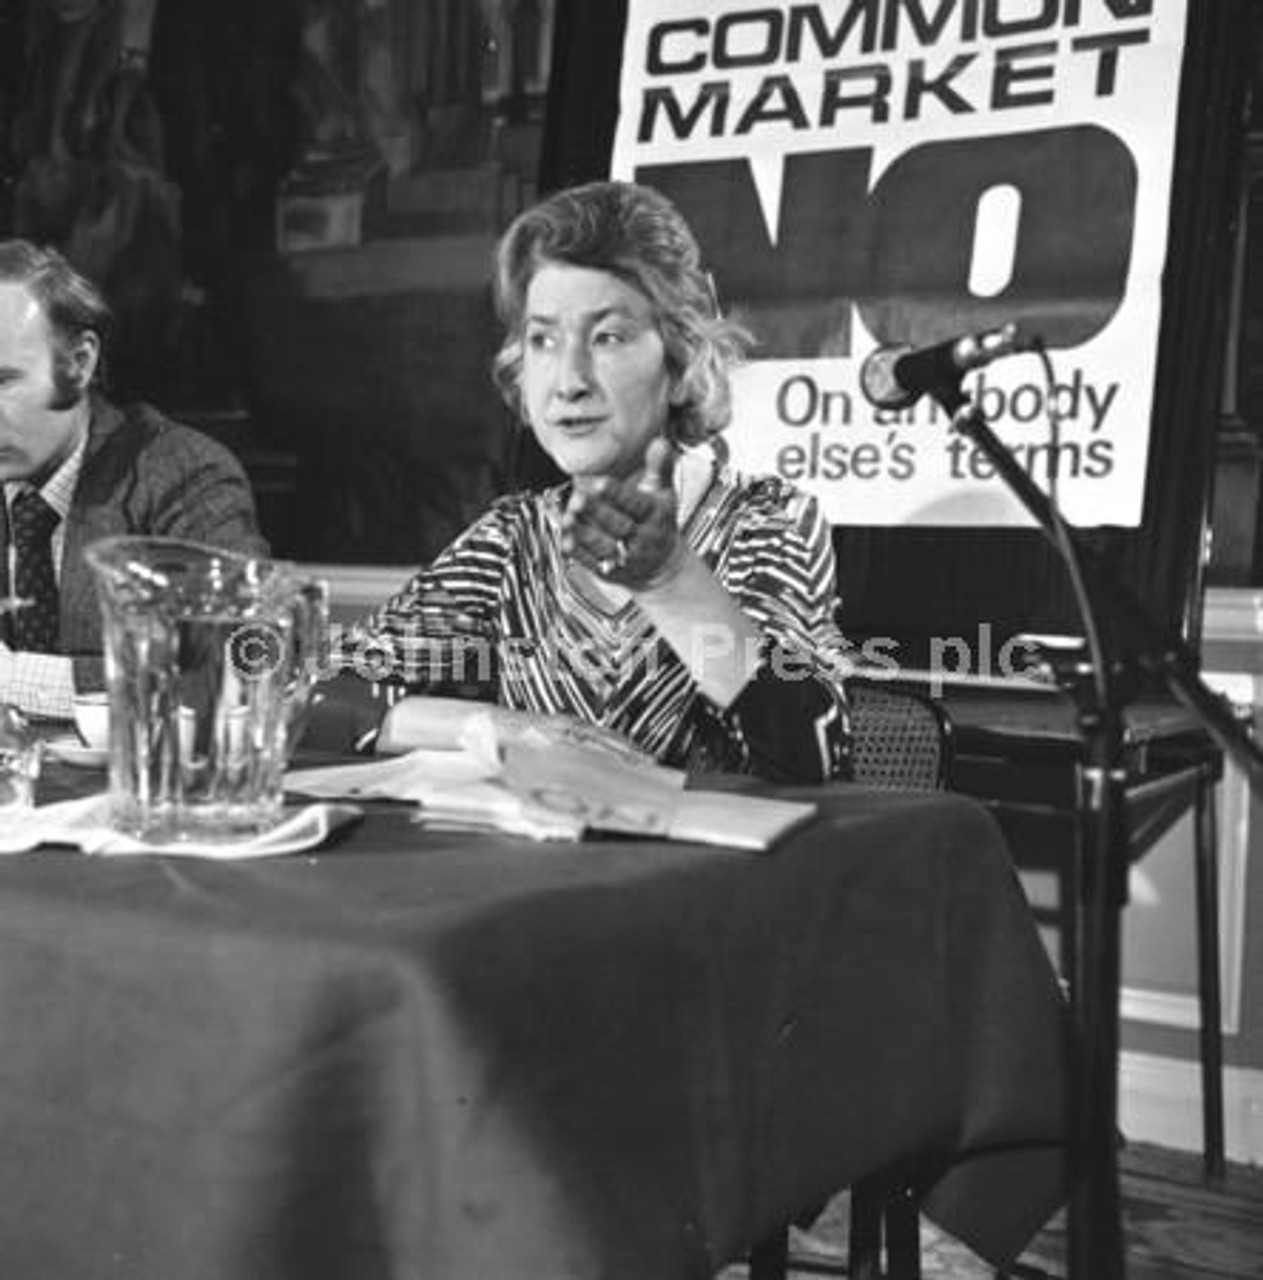 20241285-SNP MP Winnie Ewing campaigning against Britain s entry into the  Common Market EU European Union in May 1975.